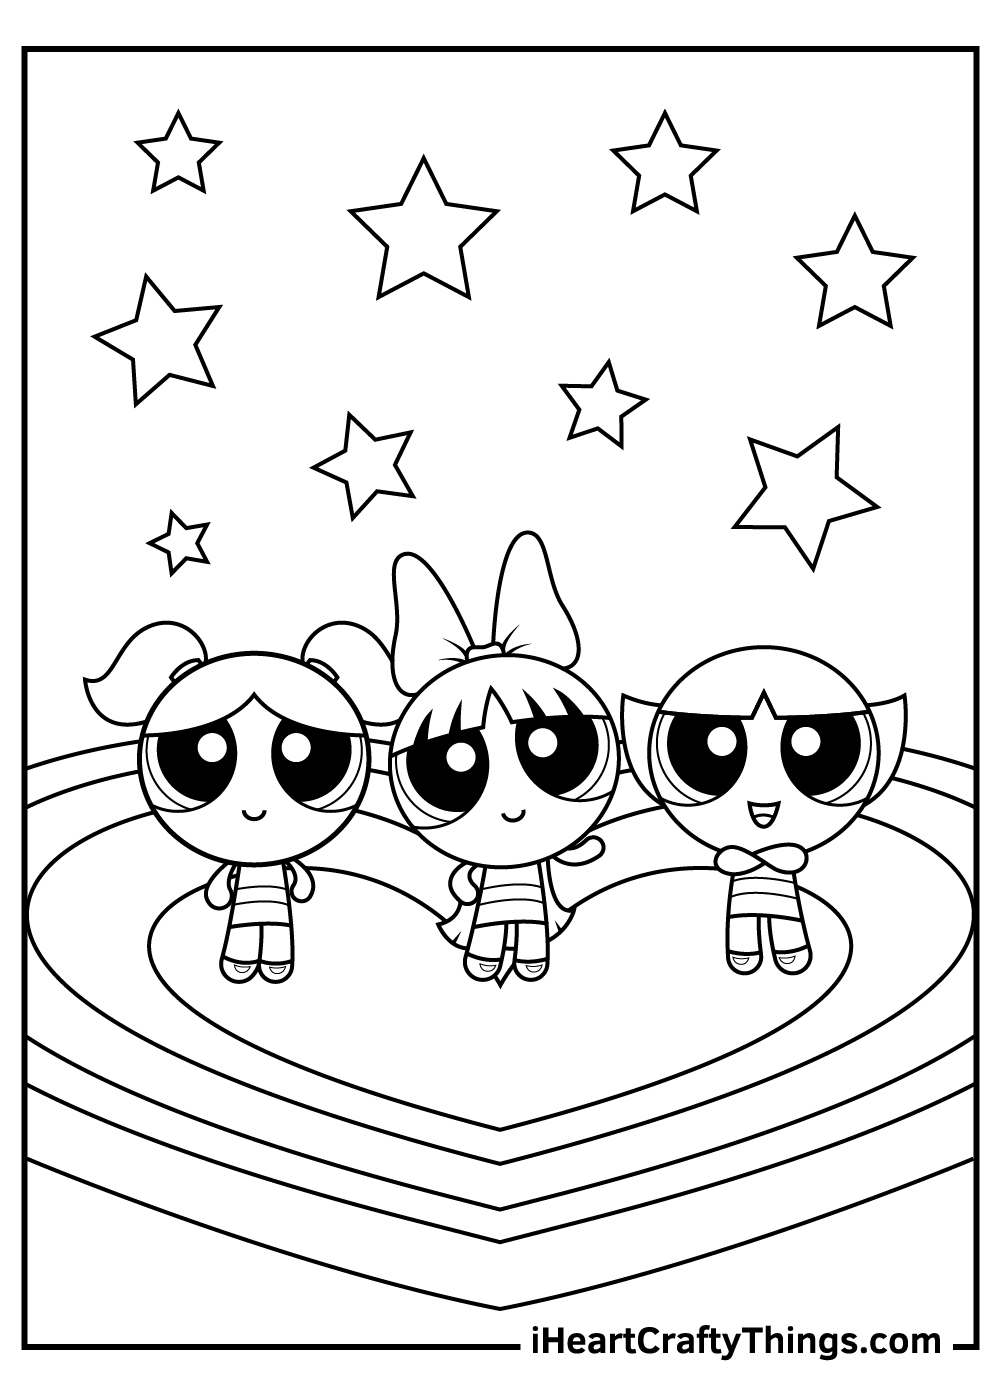 images of powerpuff girls coloring pages